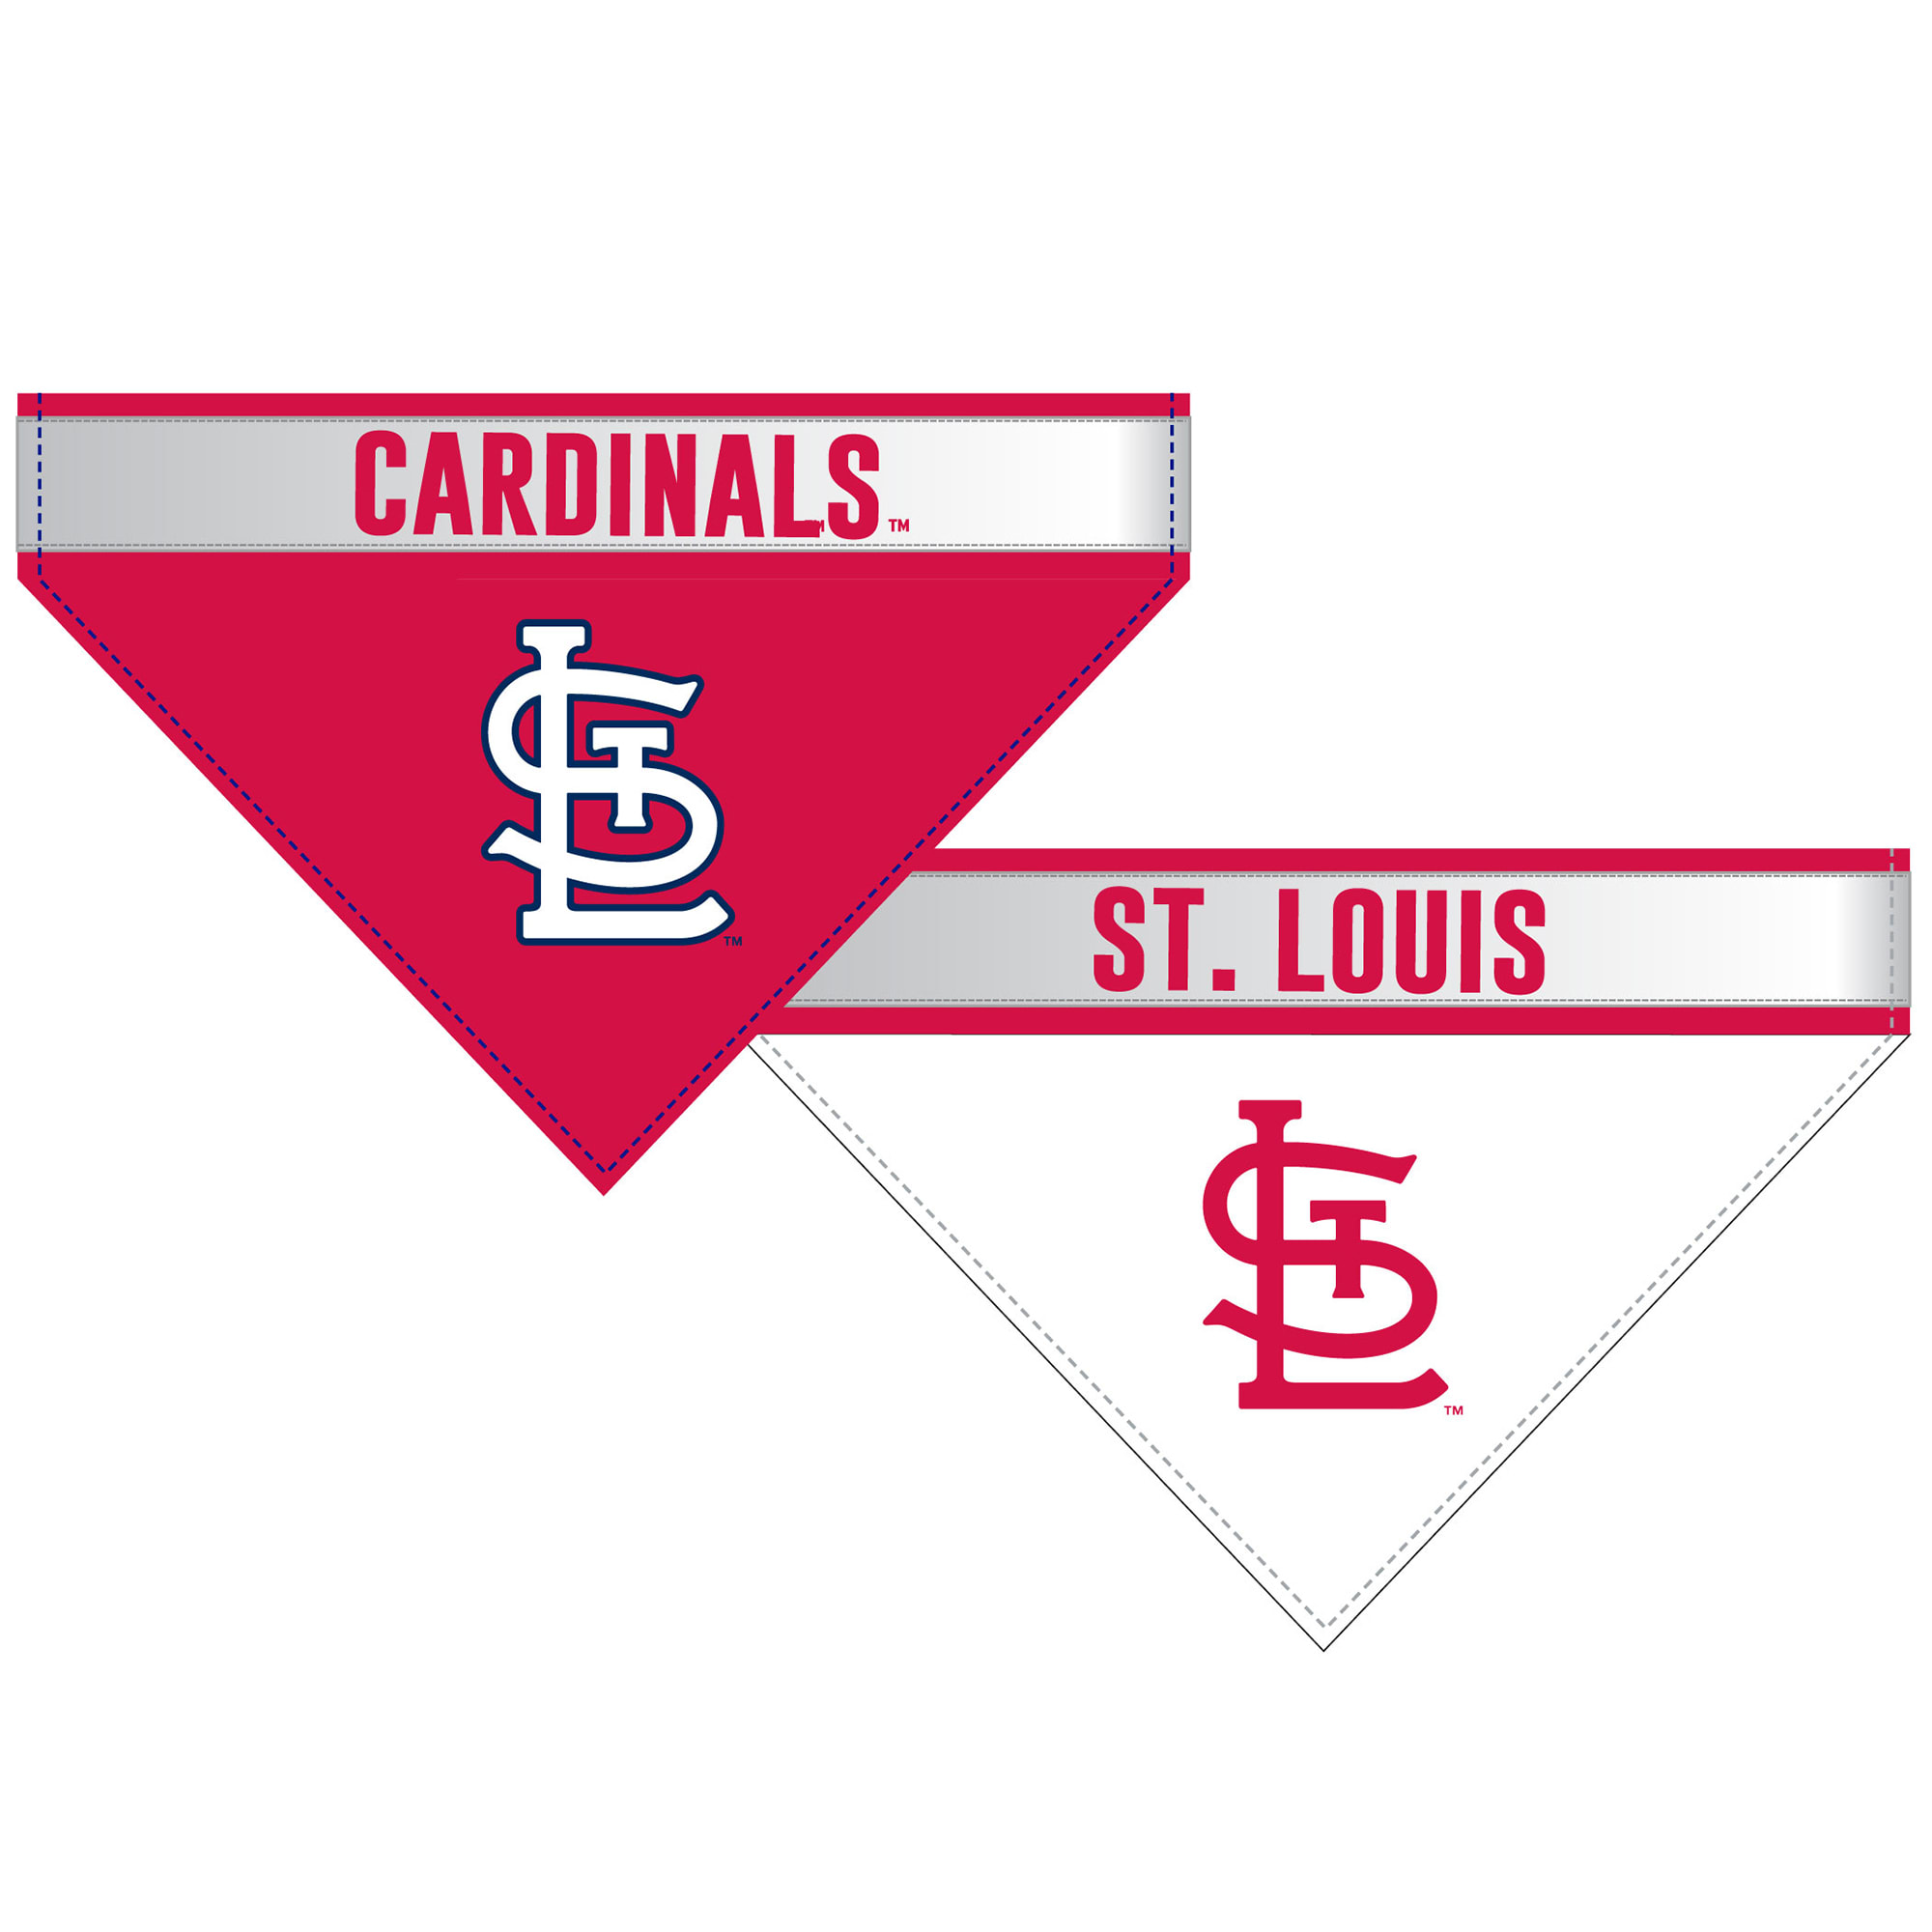 St. Louis Cardinals Font - What is this font?